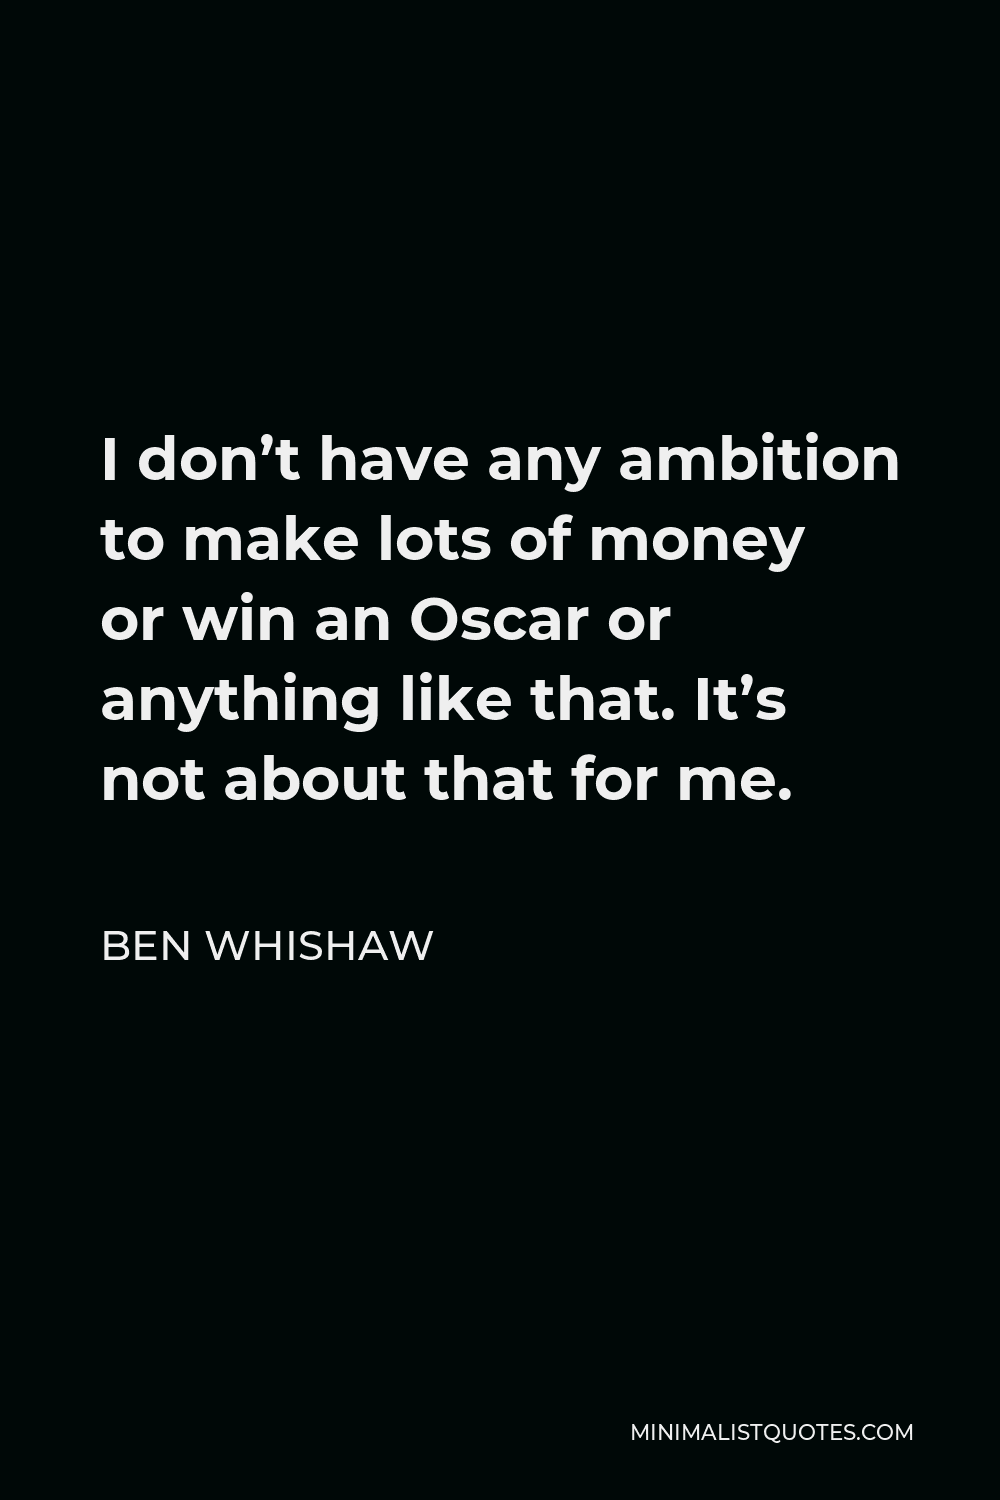 Ben Whishaw Quote - I don’t have any ambition to make lots of money or win an Oscar or anything like that. It’s not about that for me.